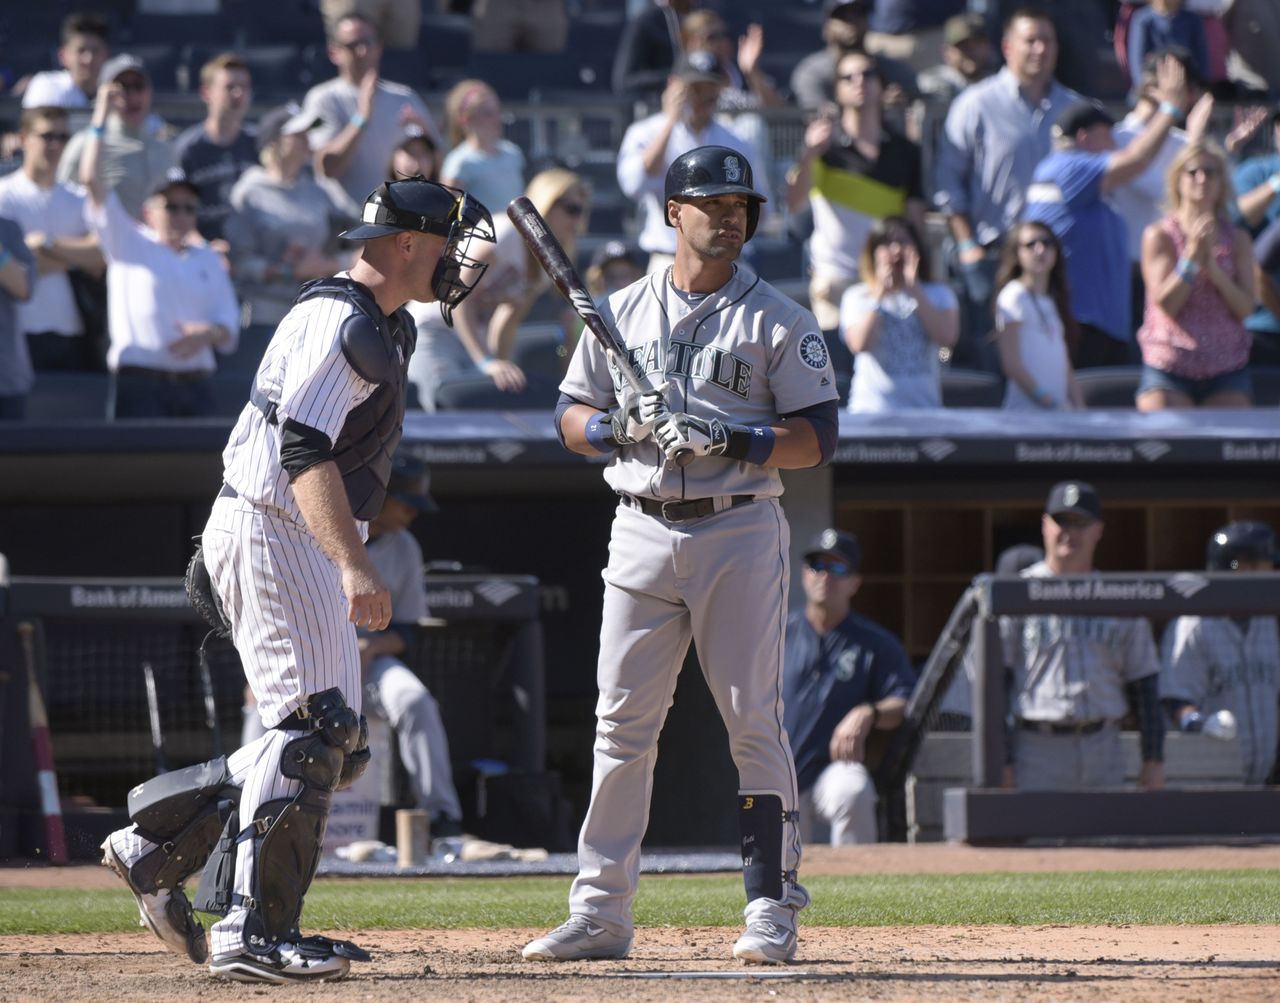 Mariners pinch hitter Franklin Gutierrez look on after striking out to end Sunday’s game as Yankees catcher Brian McCan walks away to congratulate New York pitcher Andrew Miller.